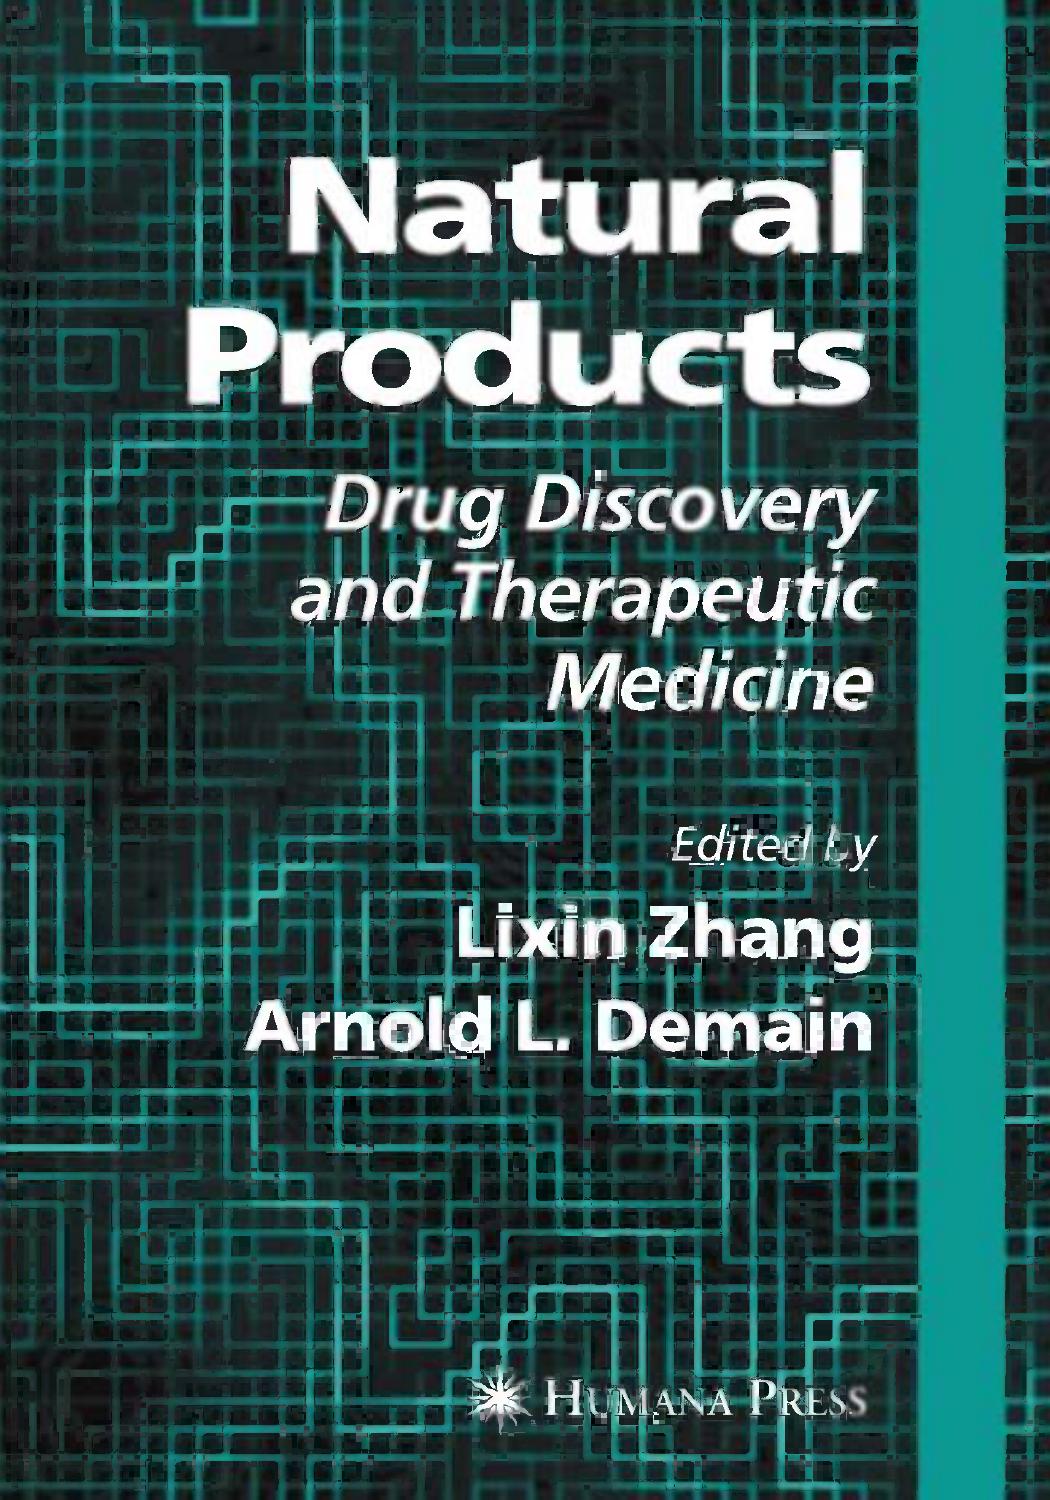 Natural Products Drug Discovery and Therapeutic Medicine 2005